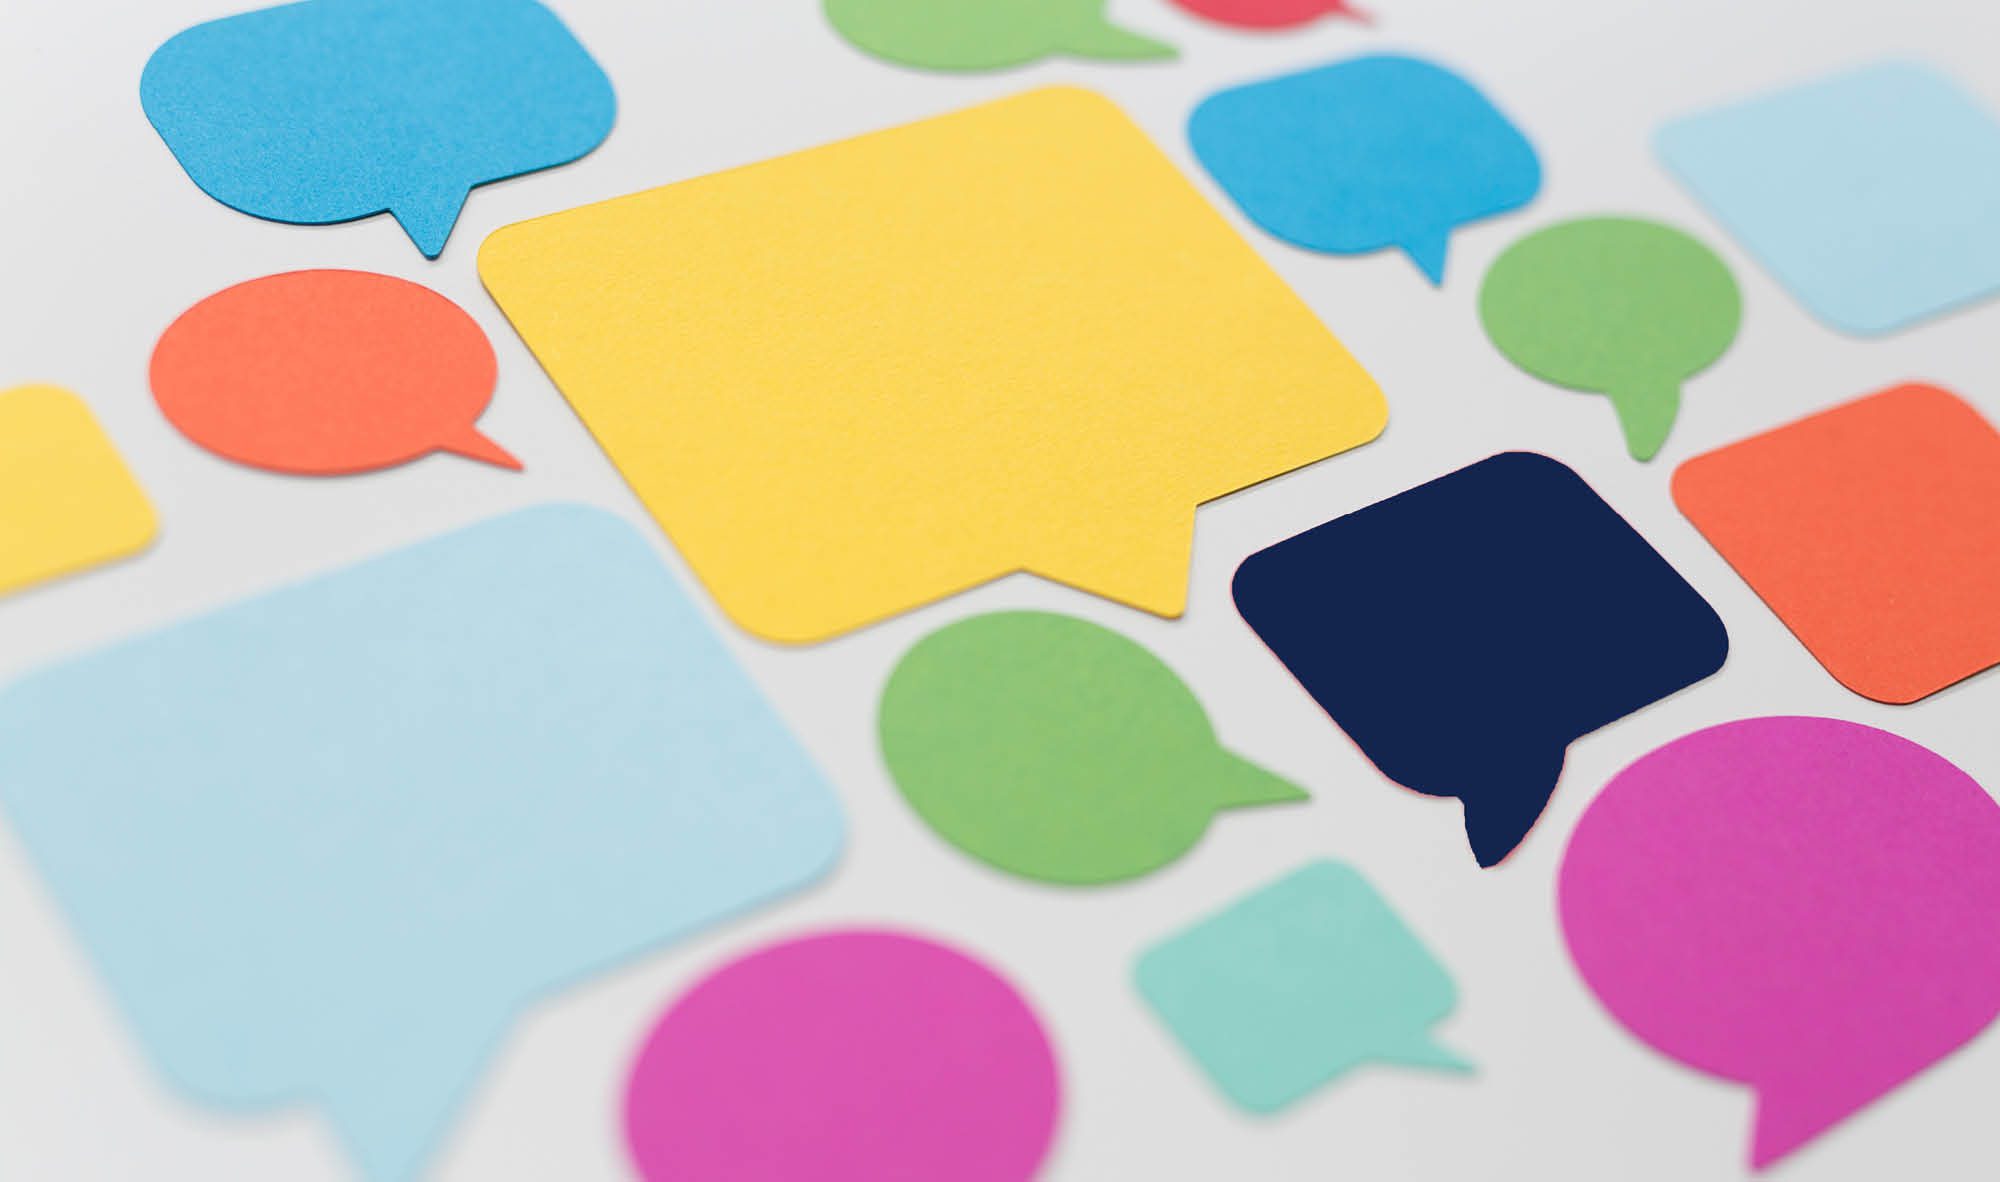 Multicolored post-it notes shaped like word clouds or thought bubbles.